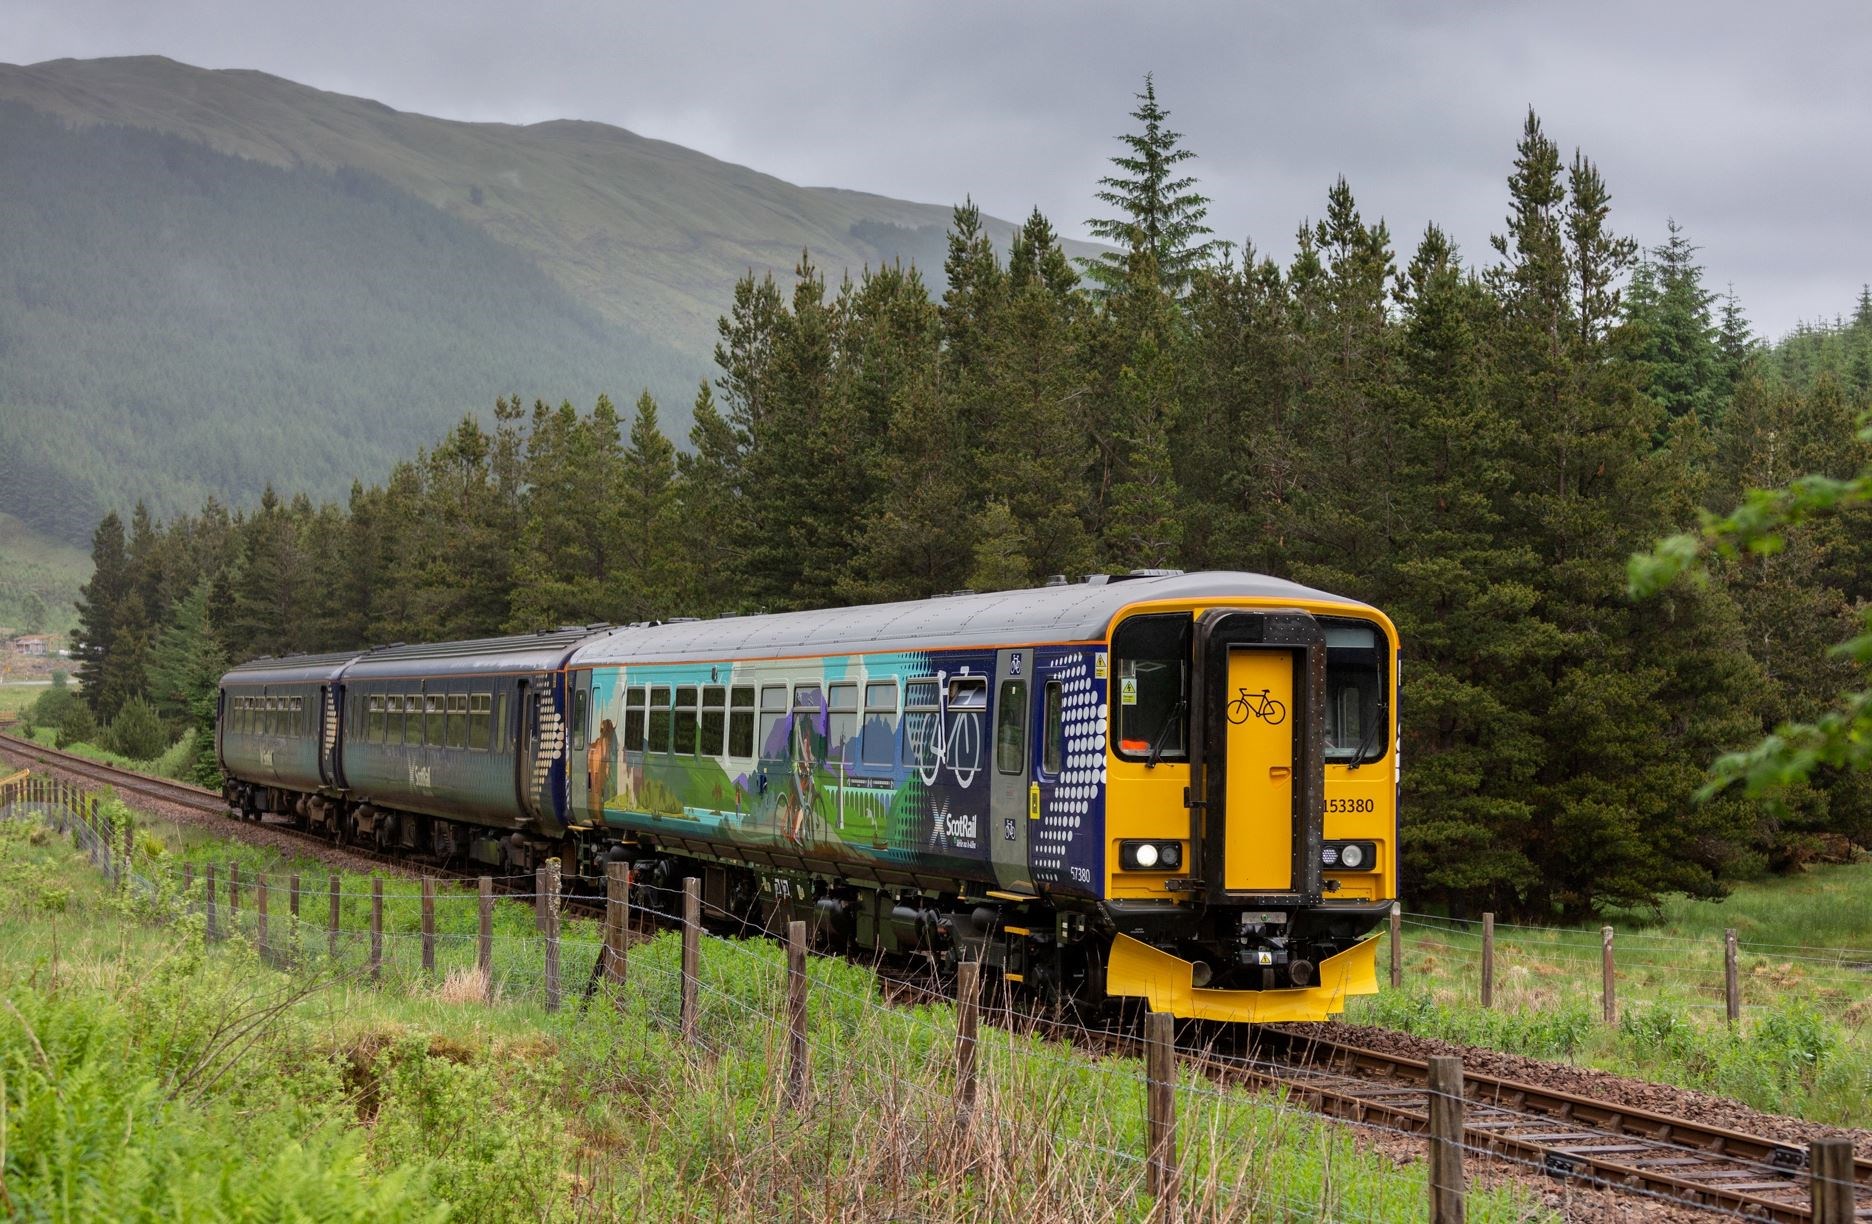 The revamped Highland Explorer Class 153 trains have been operating on the West Highland Line since 2021, but hopes similar revamps of Class 158 trains on the Kyle or Far North Lines appear to have been dashed.